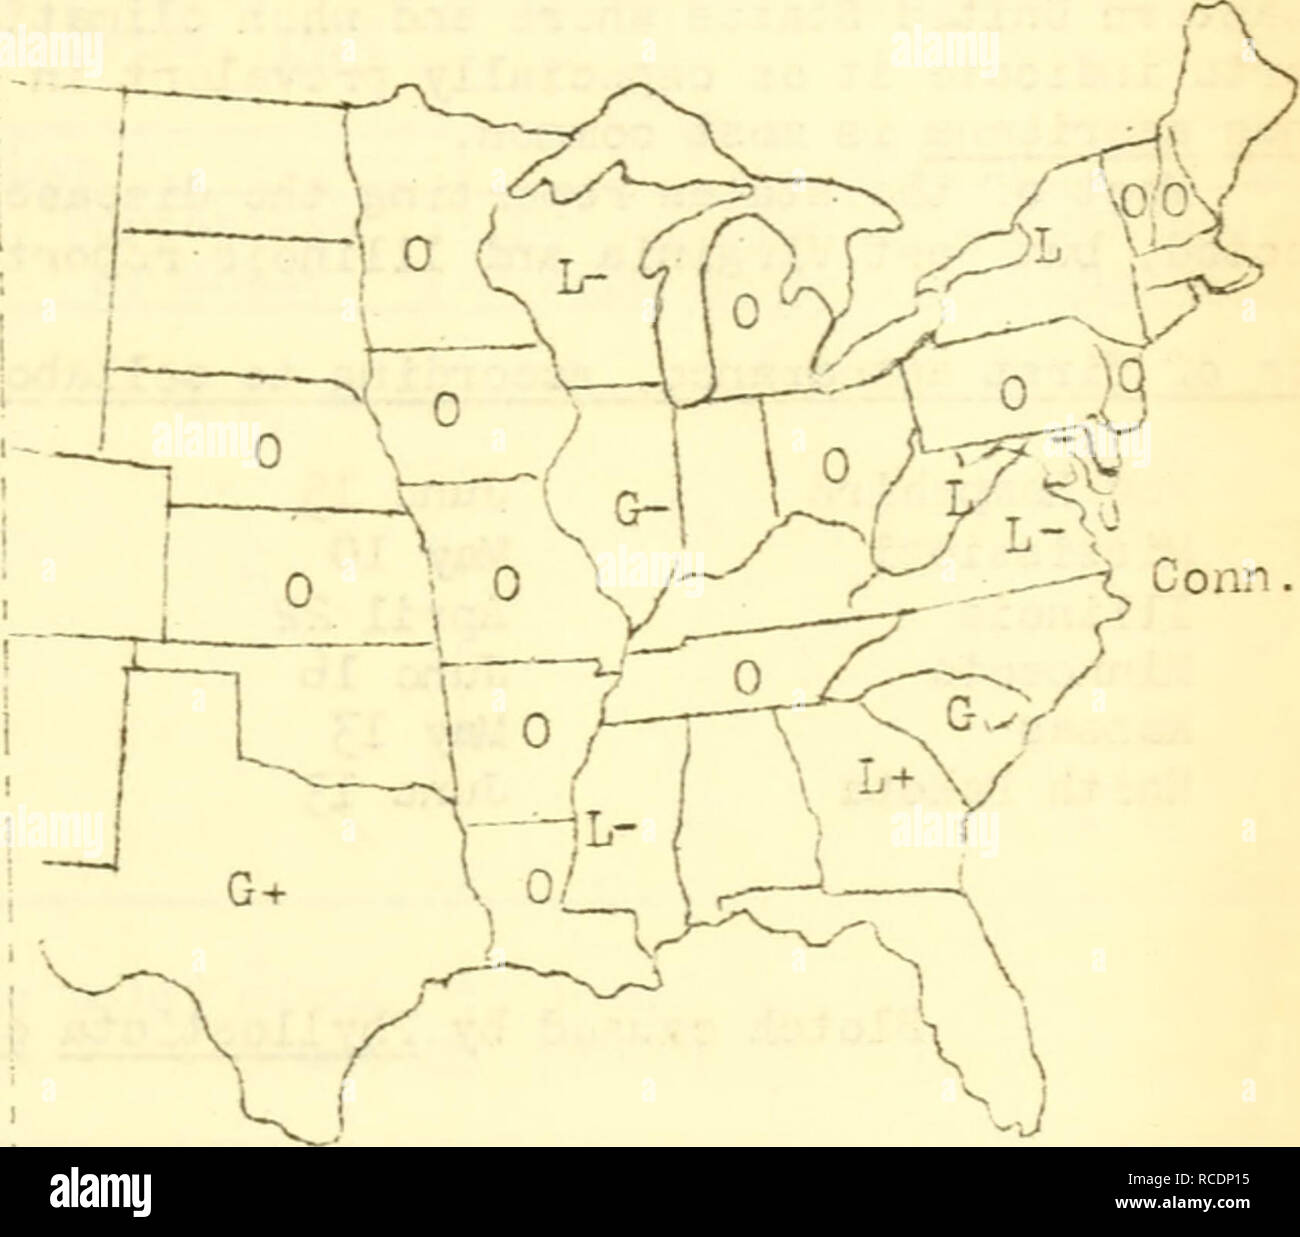 . Diseases of fruit and nut crops in the United States in 1921. Fruit Diseases and pests United States; Nuts Diseases and pests United States. PLU!i AT© PRUiS - Bacterial spot 89 Bacterial spot caused by Bacteria&quot;: pruni EPS The accompanying map (?ig. 19) shov.'s the distribution and importance of bacterial r-pot of plum as it was reported during 192I. The less due to this disease was estimated at 1% in South Carolina and 3^ in Texas, while in other states it was not rnorc than a trace. Connecticut reported fruit t?pot; Virginia, limb cankers; I'dssissippi, leaf ' , spot; C-eorgia, fruit  Stock Photo